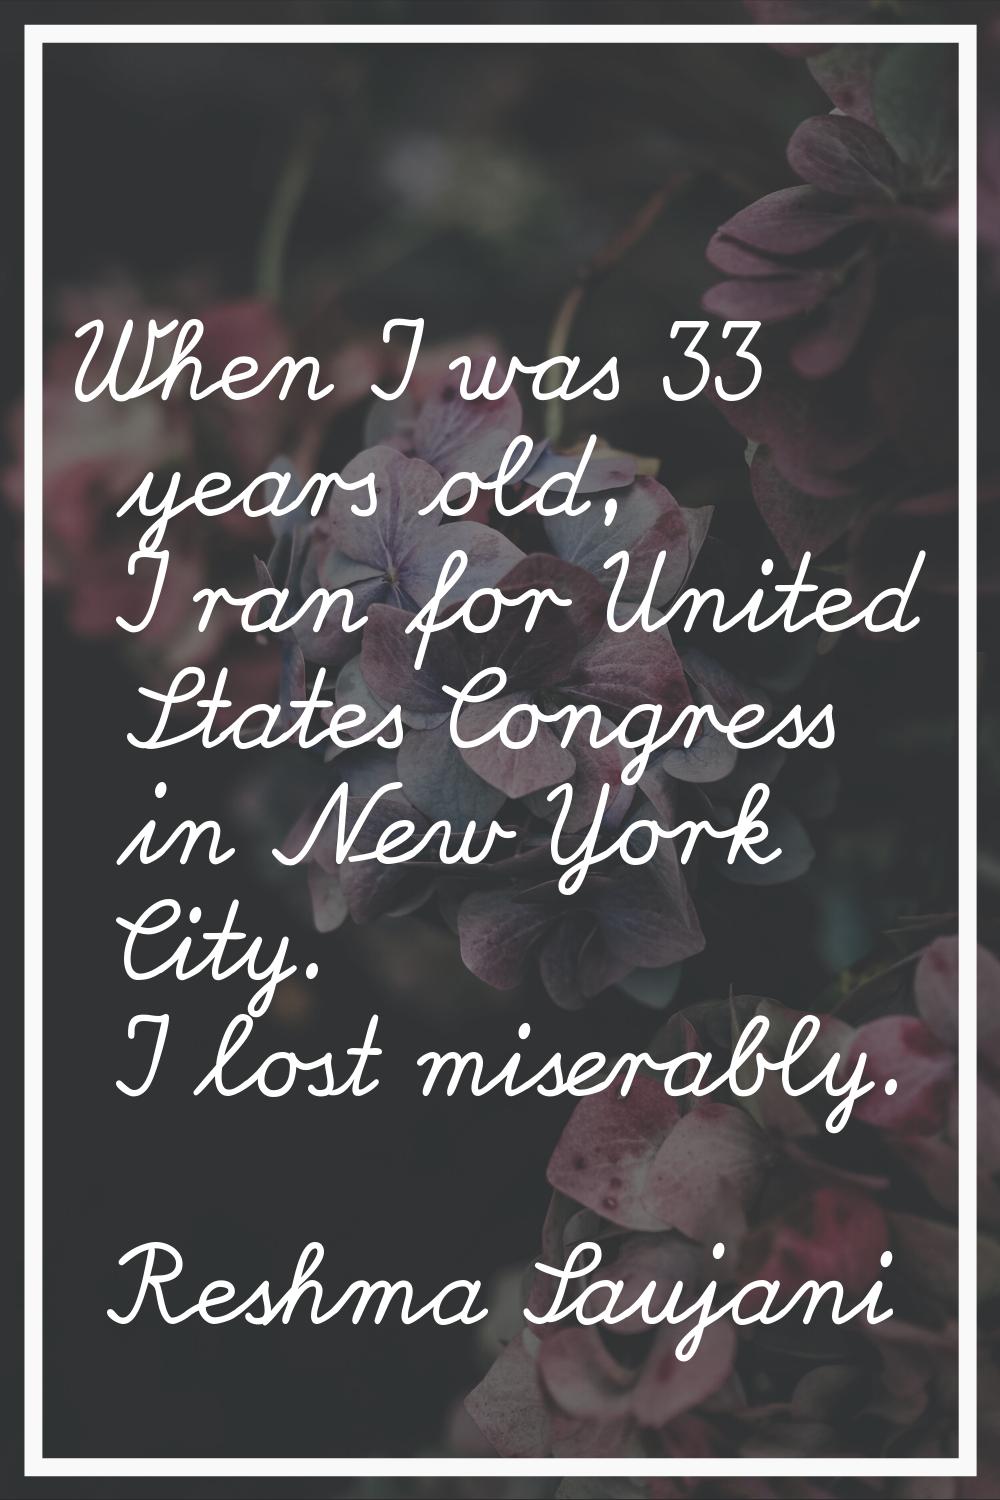 When I was 33 years old, I ran for United States Congress in New York City. I lost miserably.